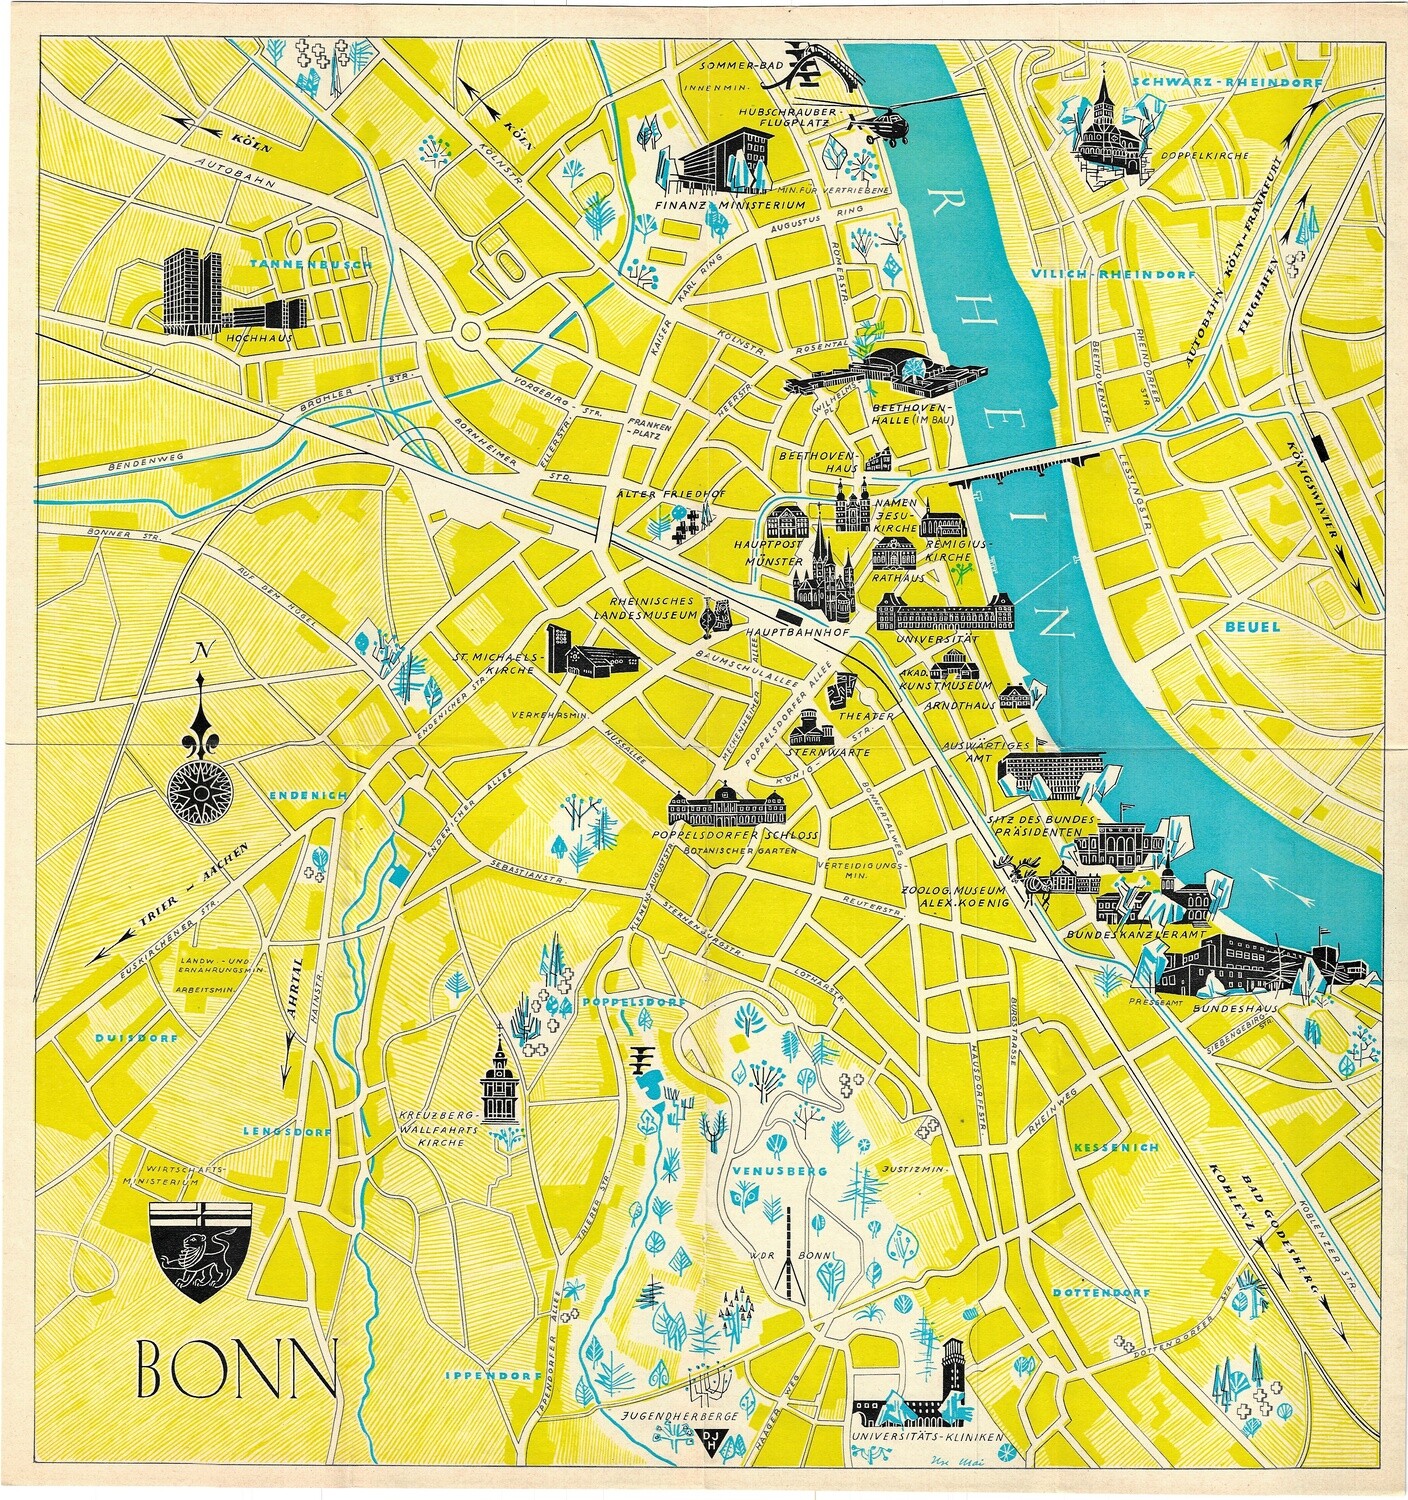 1956 Airline Map of Bonn, Germany